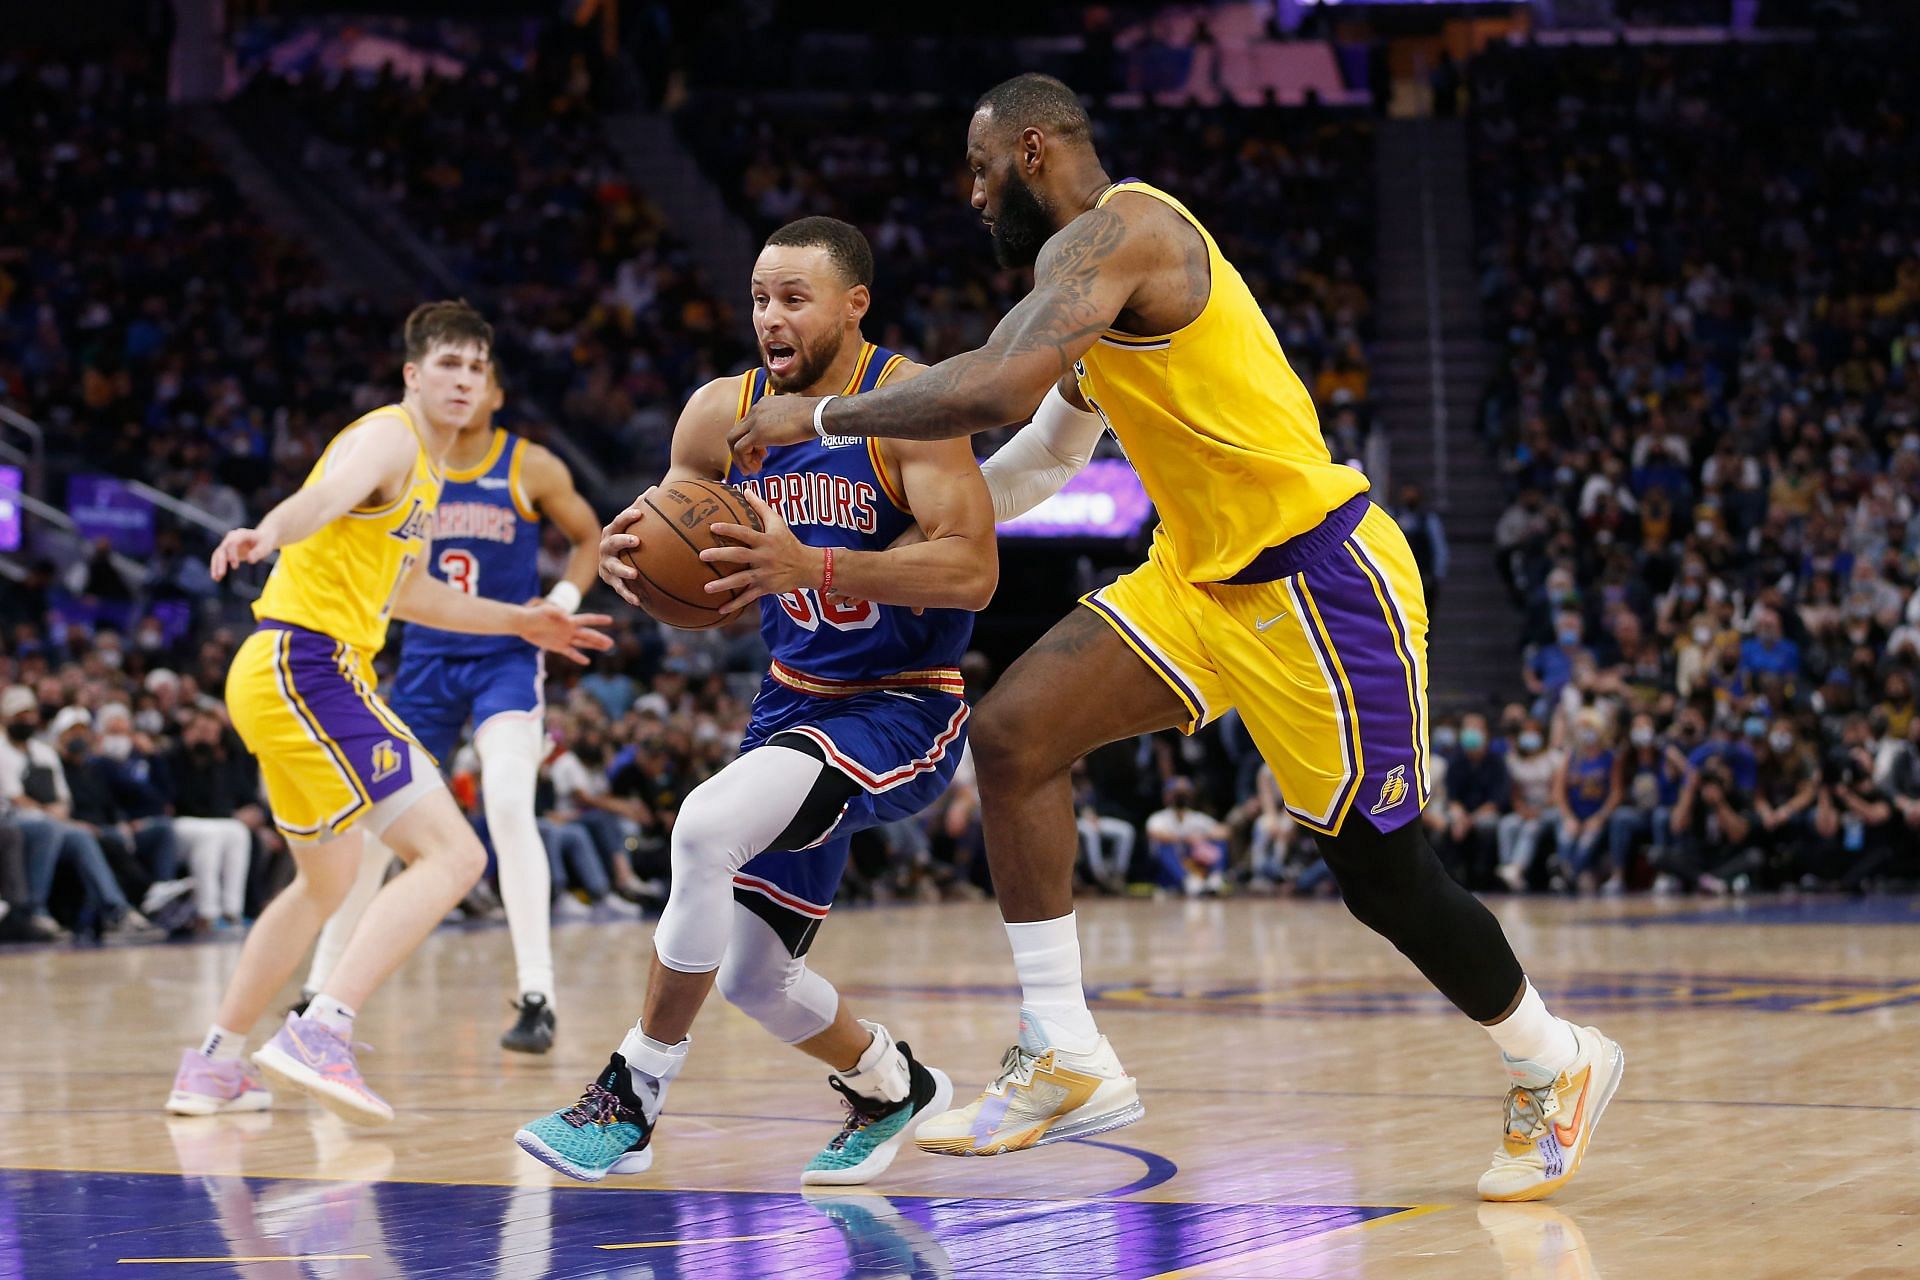 Stephen Curry of the Golden State Warriors drives to the basket against LeBron James of the LA Lakers.